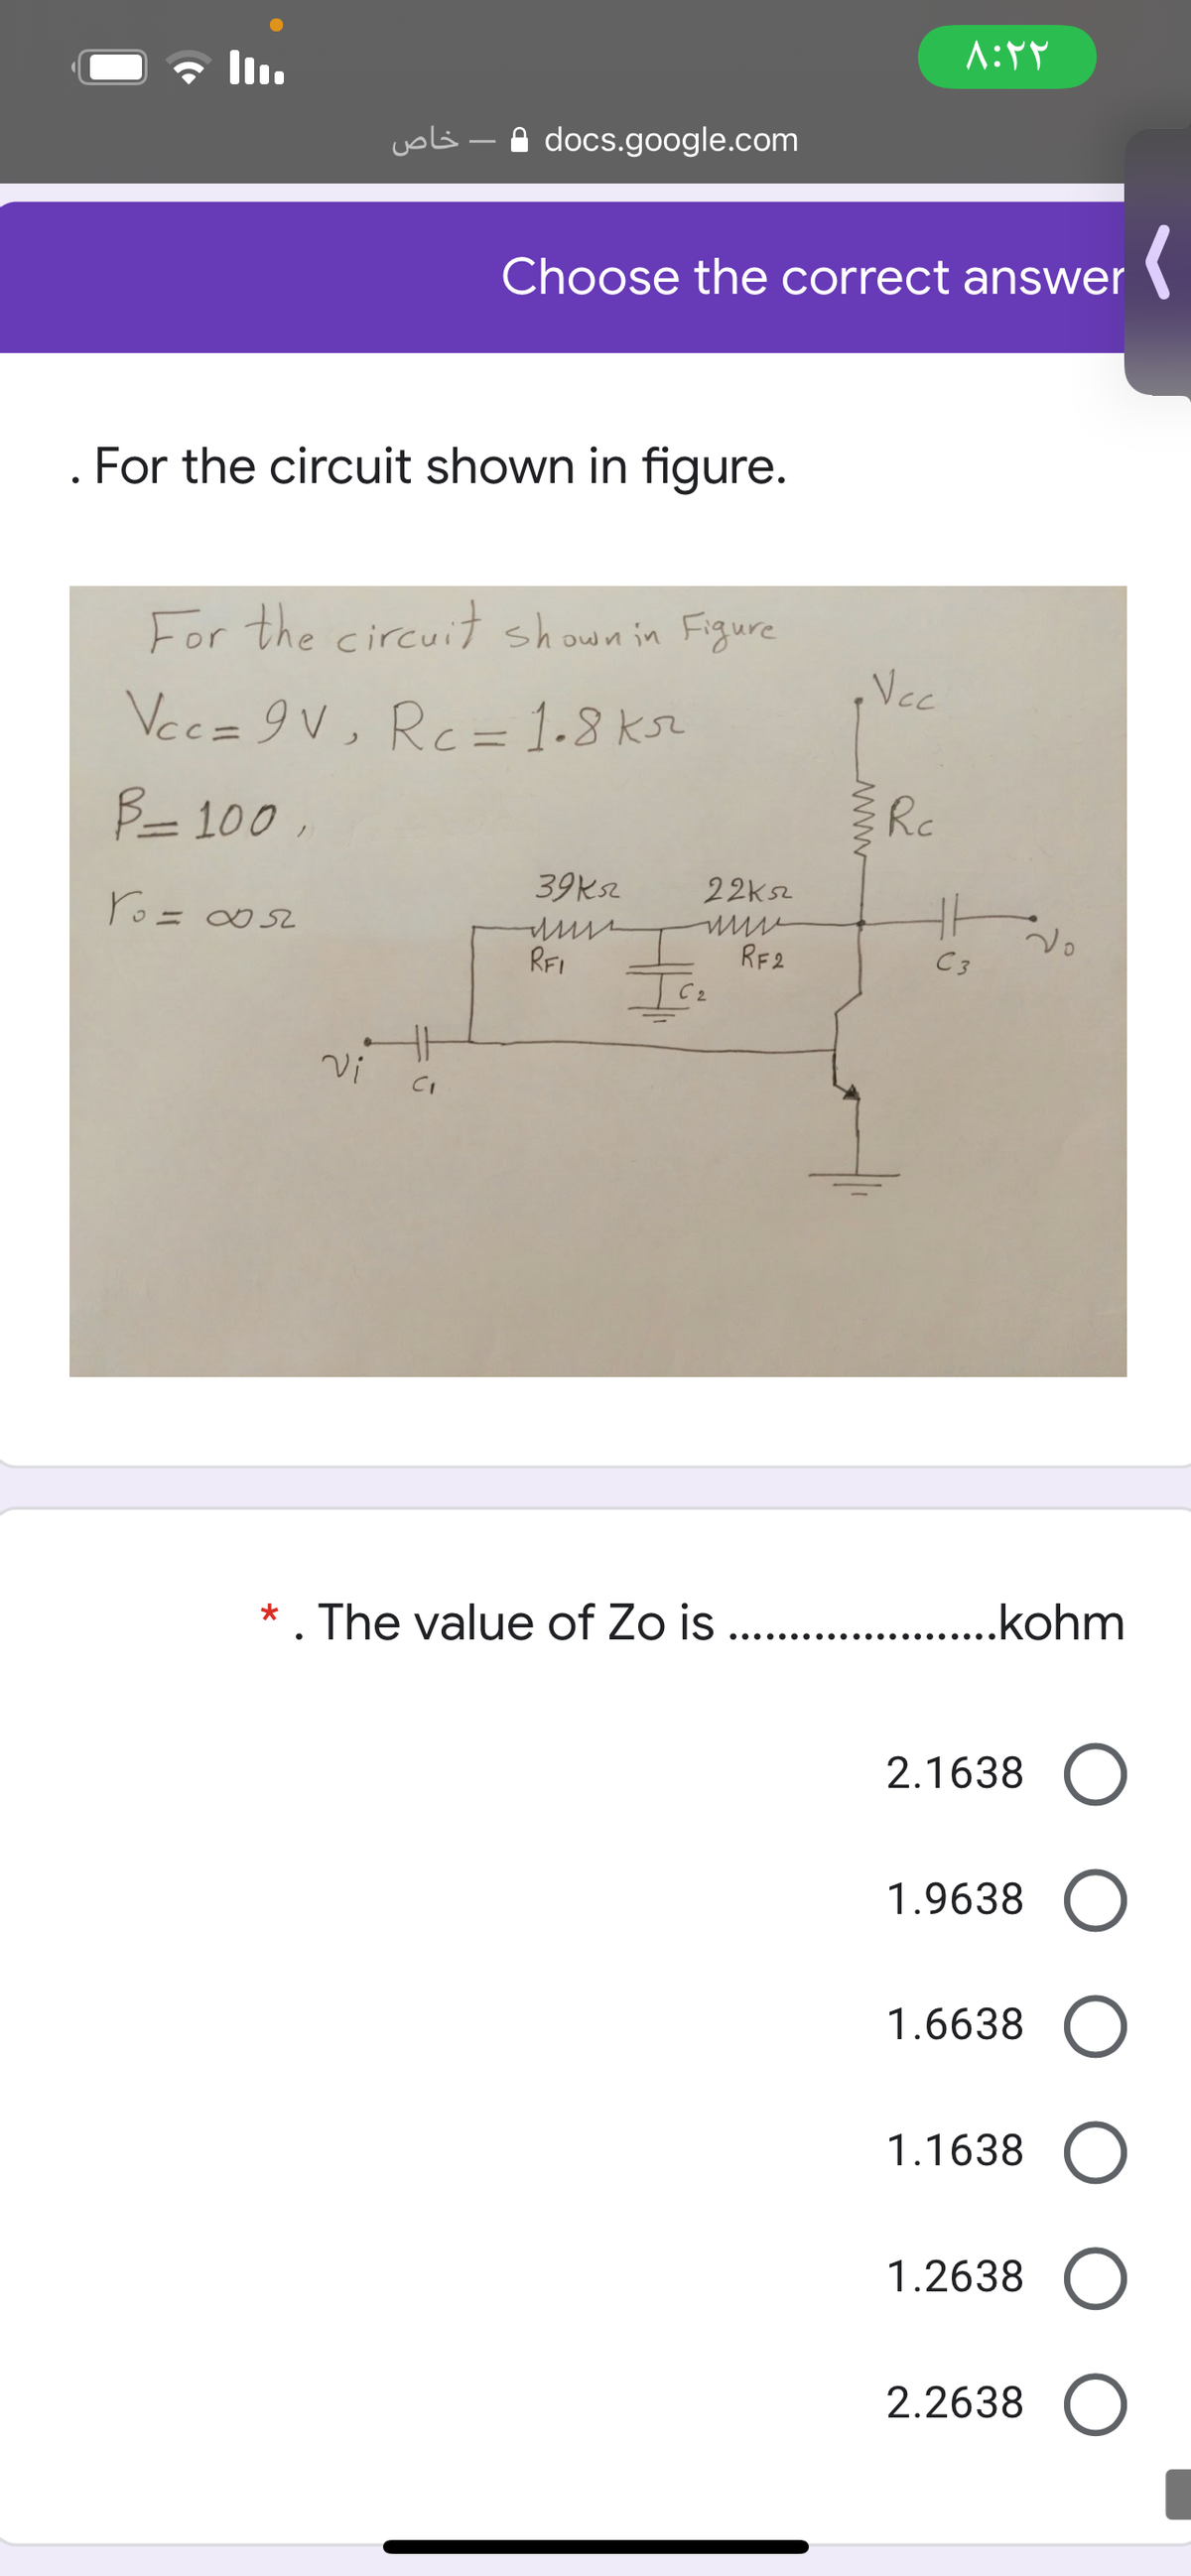 vols -A docs.google.com
Choose the correct answer
For the circuit shown in figure.
For the circuit shown in Figure
Vcc
Vcc= 9V, Rc= 1-8 ksz
%3D
B= 100,
Rc
39Ks2
22ks2
Yo= 0 52
∞ SZ
REI
RF2
C3
Vi
CI
* . The value of Zo is
.kohm
.... ....
2.1638 O
1.9638 O
1.6638 O
1.1638 O
1.2638 O
2.2638 O
